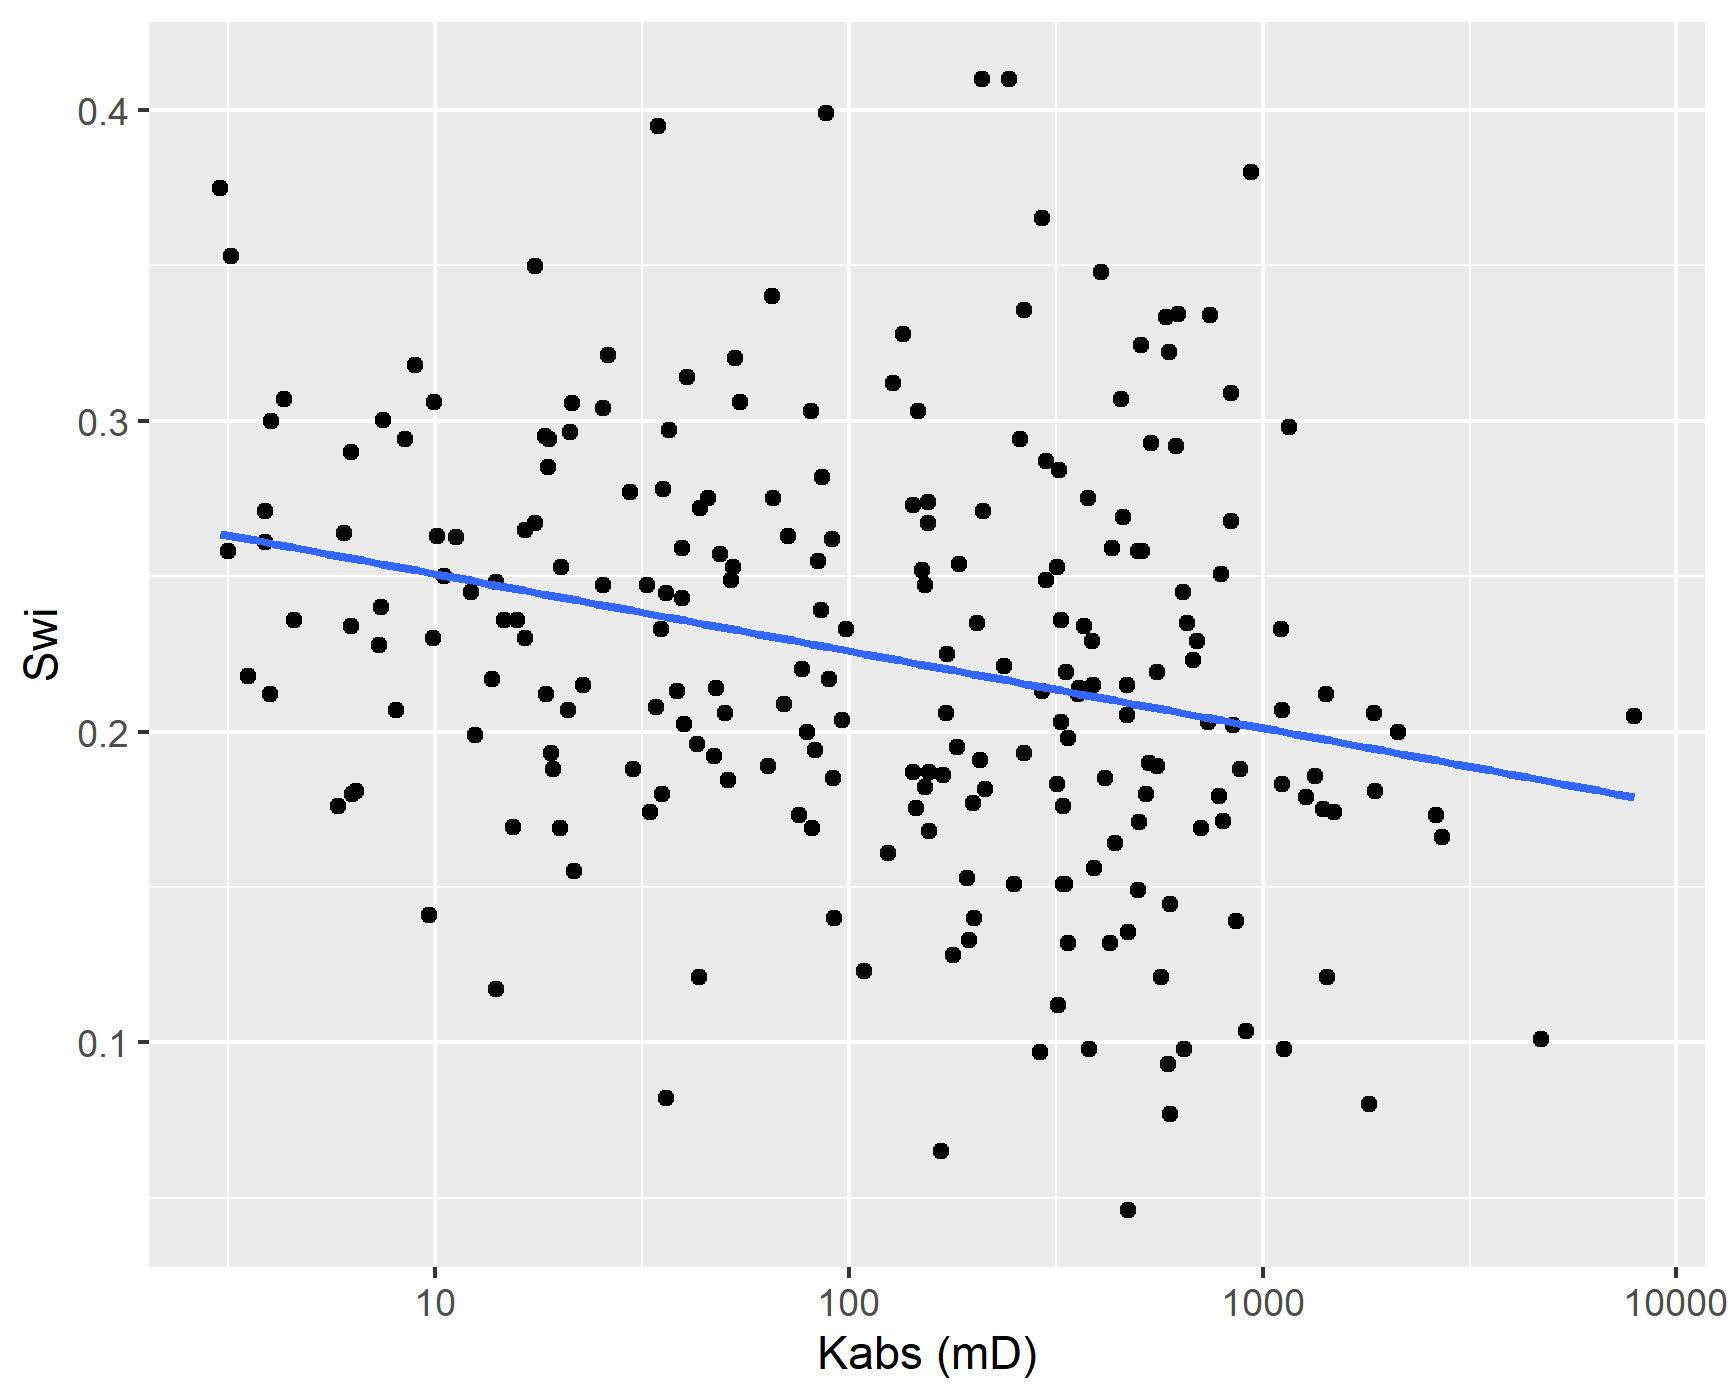 Non-pooled simple linear regression.